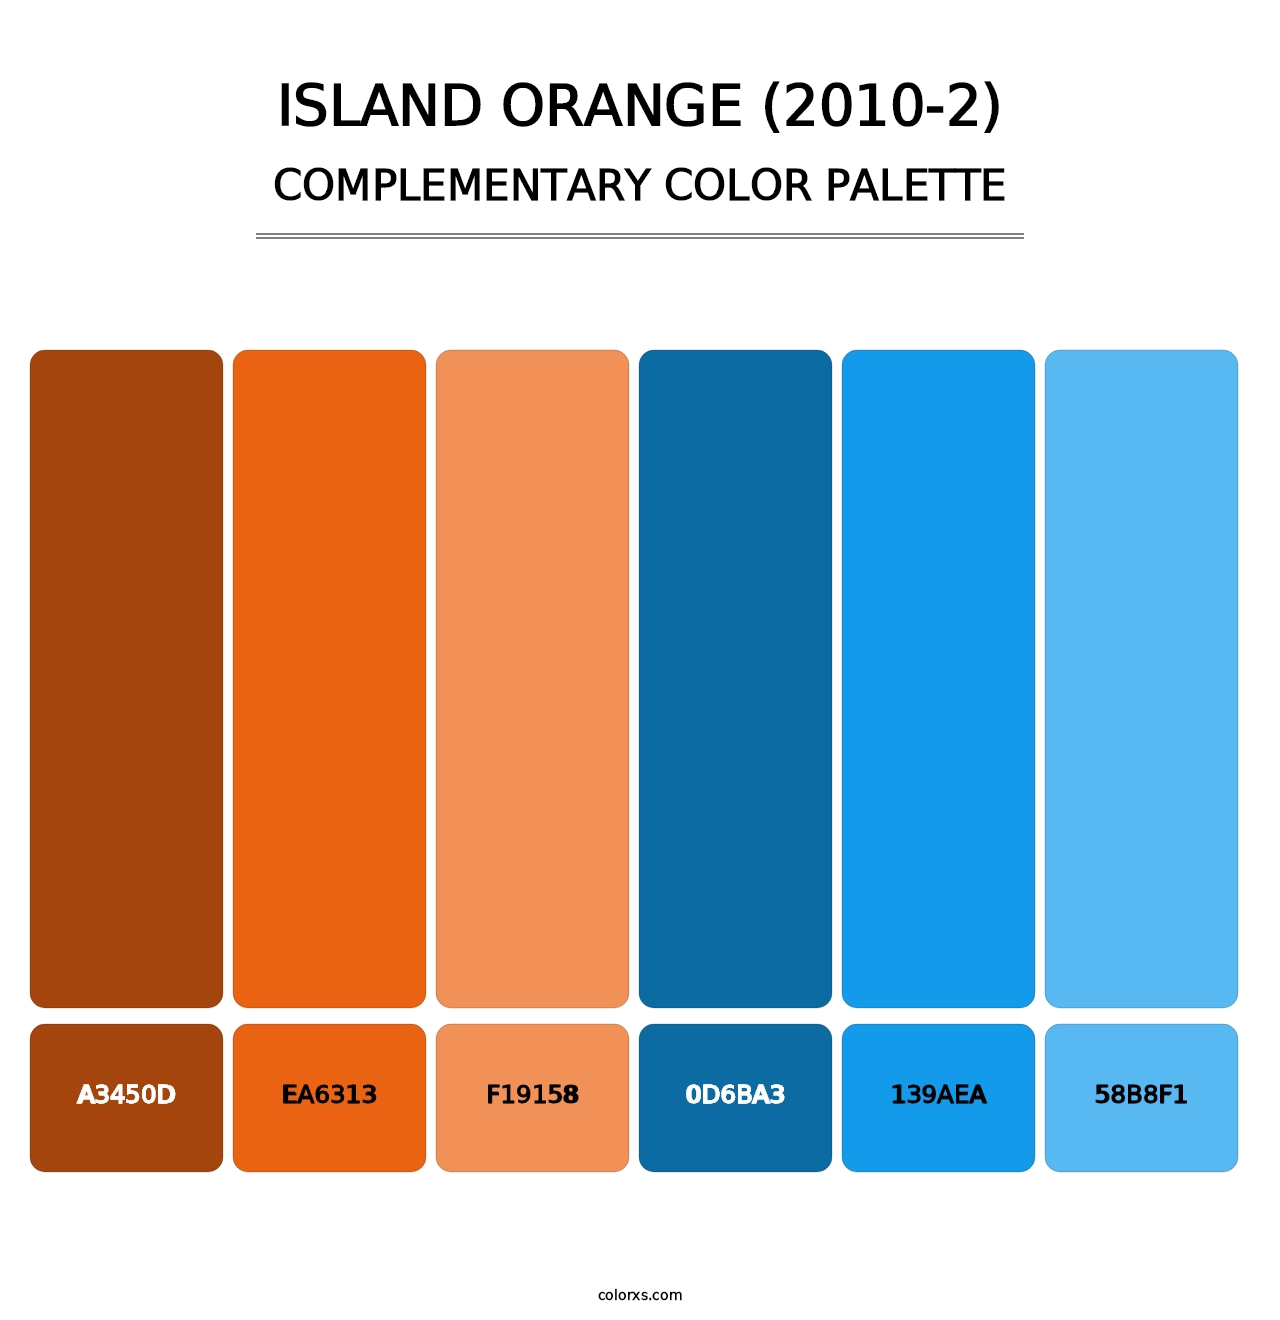 Island Orange (2010-2) - Complementary Color Palette